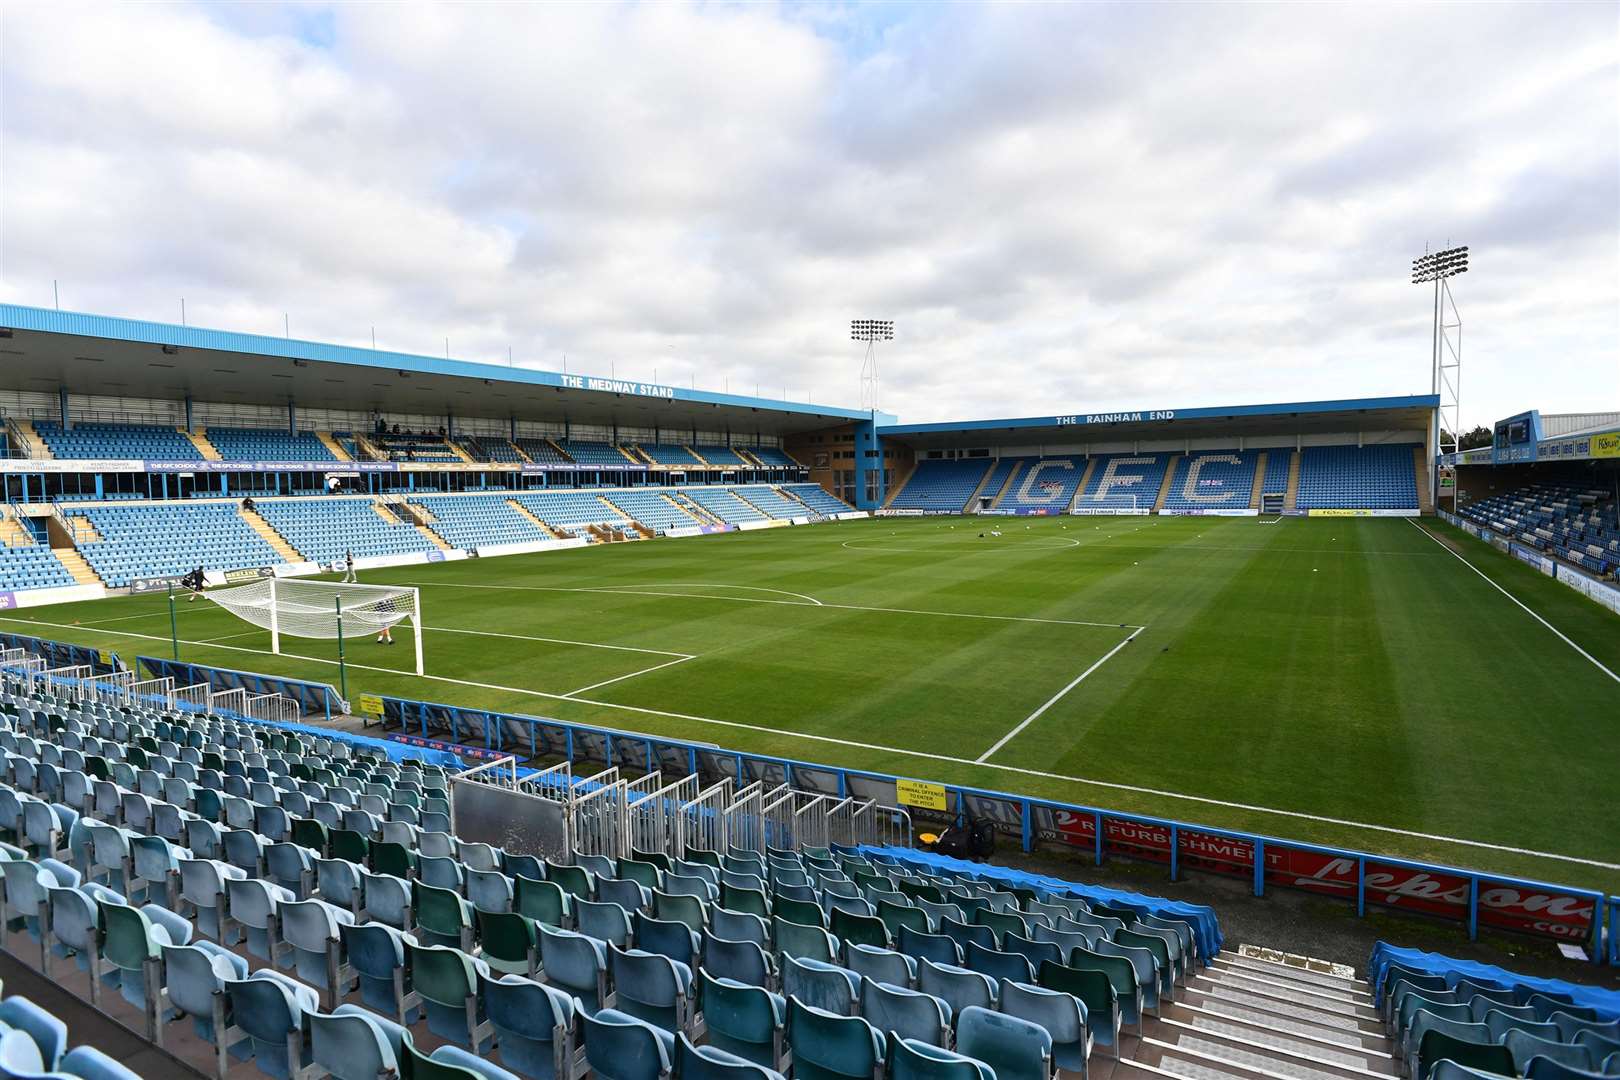 Man charged by police after incident in match between Gillingham and Lincoln City